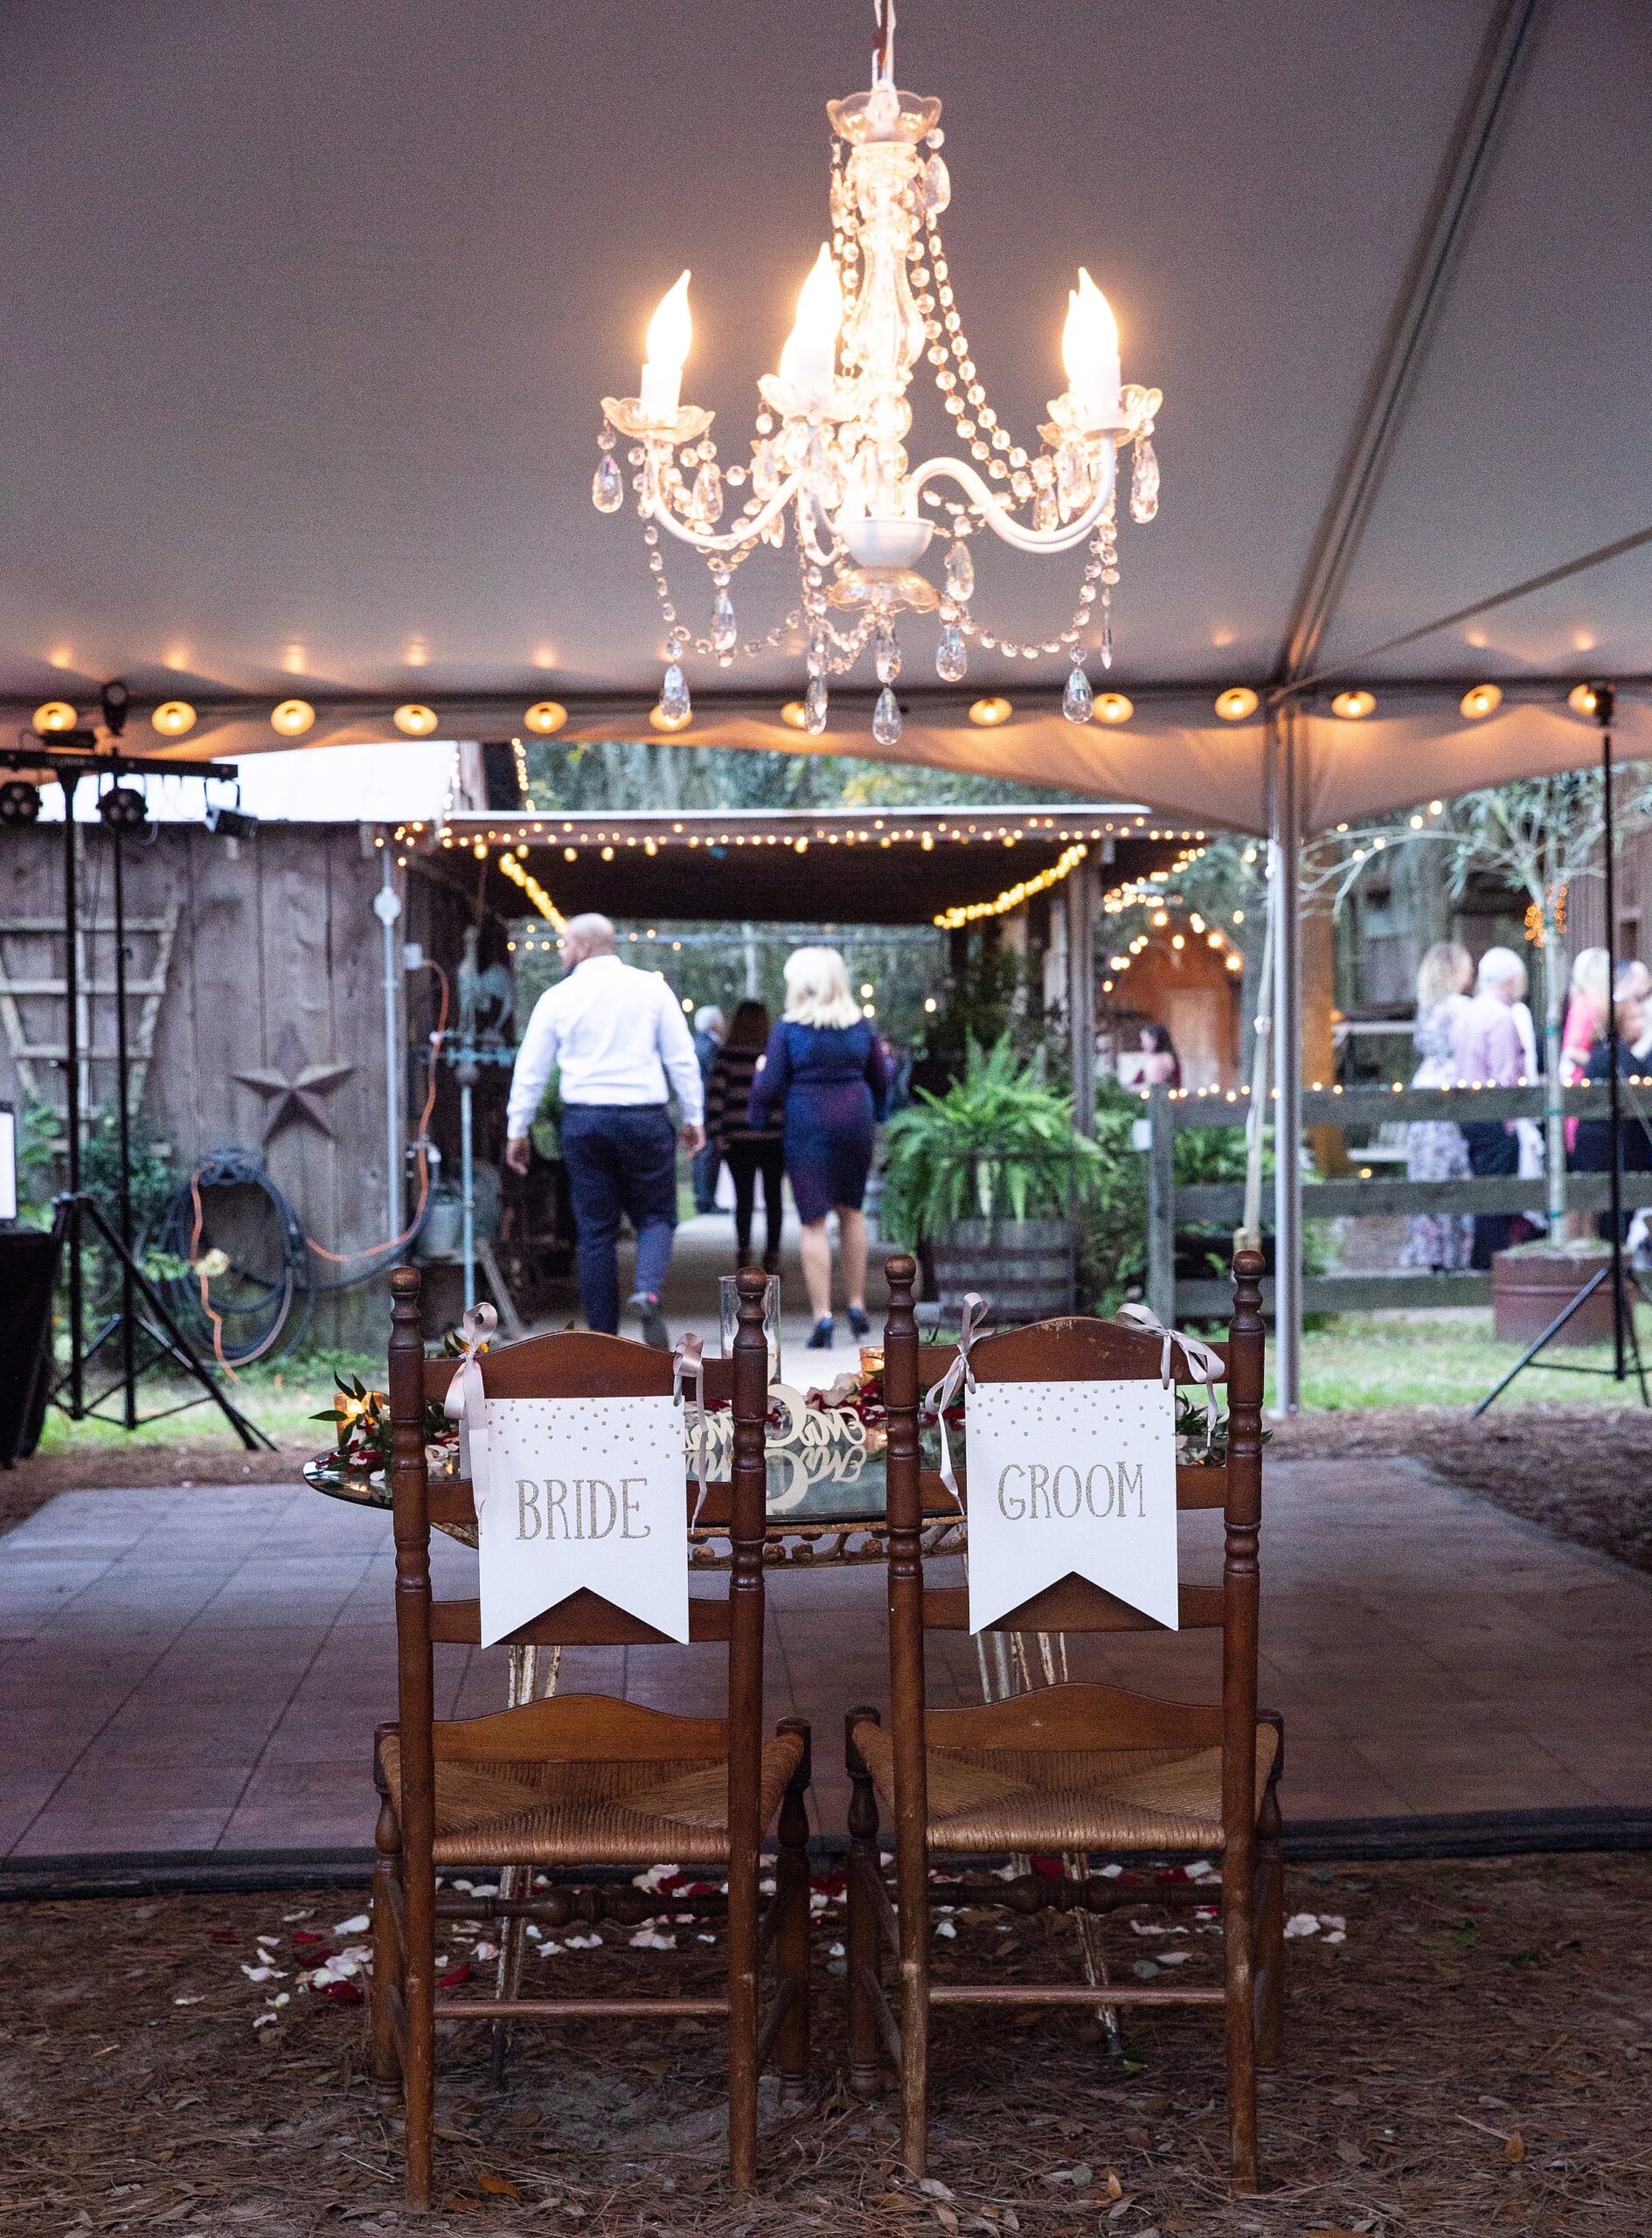 Details of a newlywed's head table at their tucker's farmhouse wedding reception under a tent and chandelier